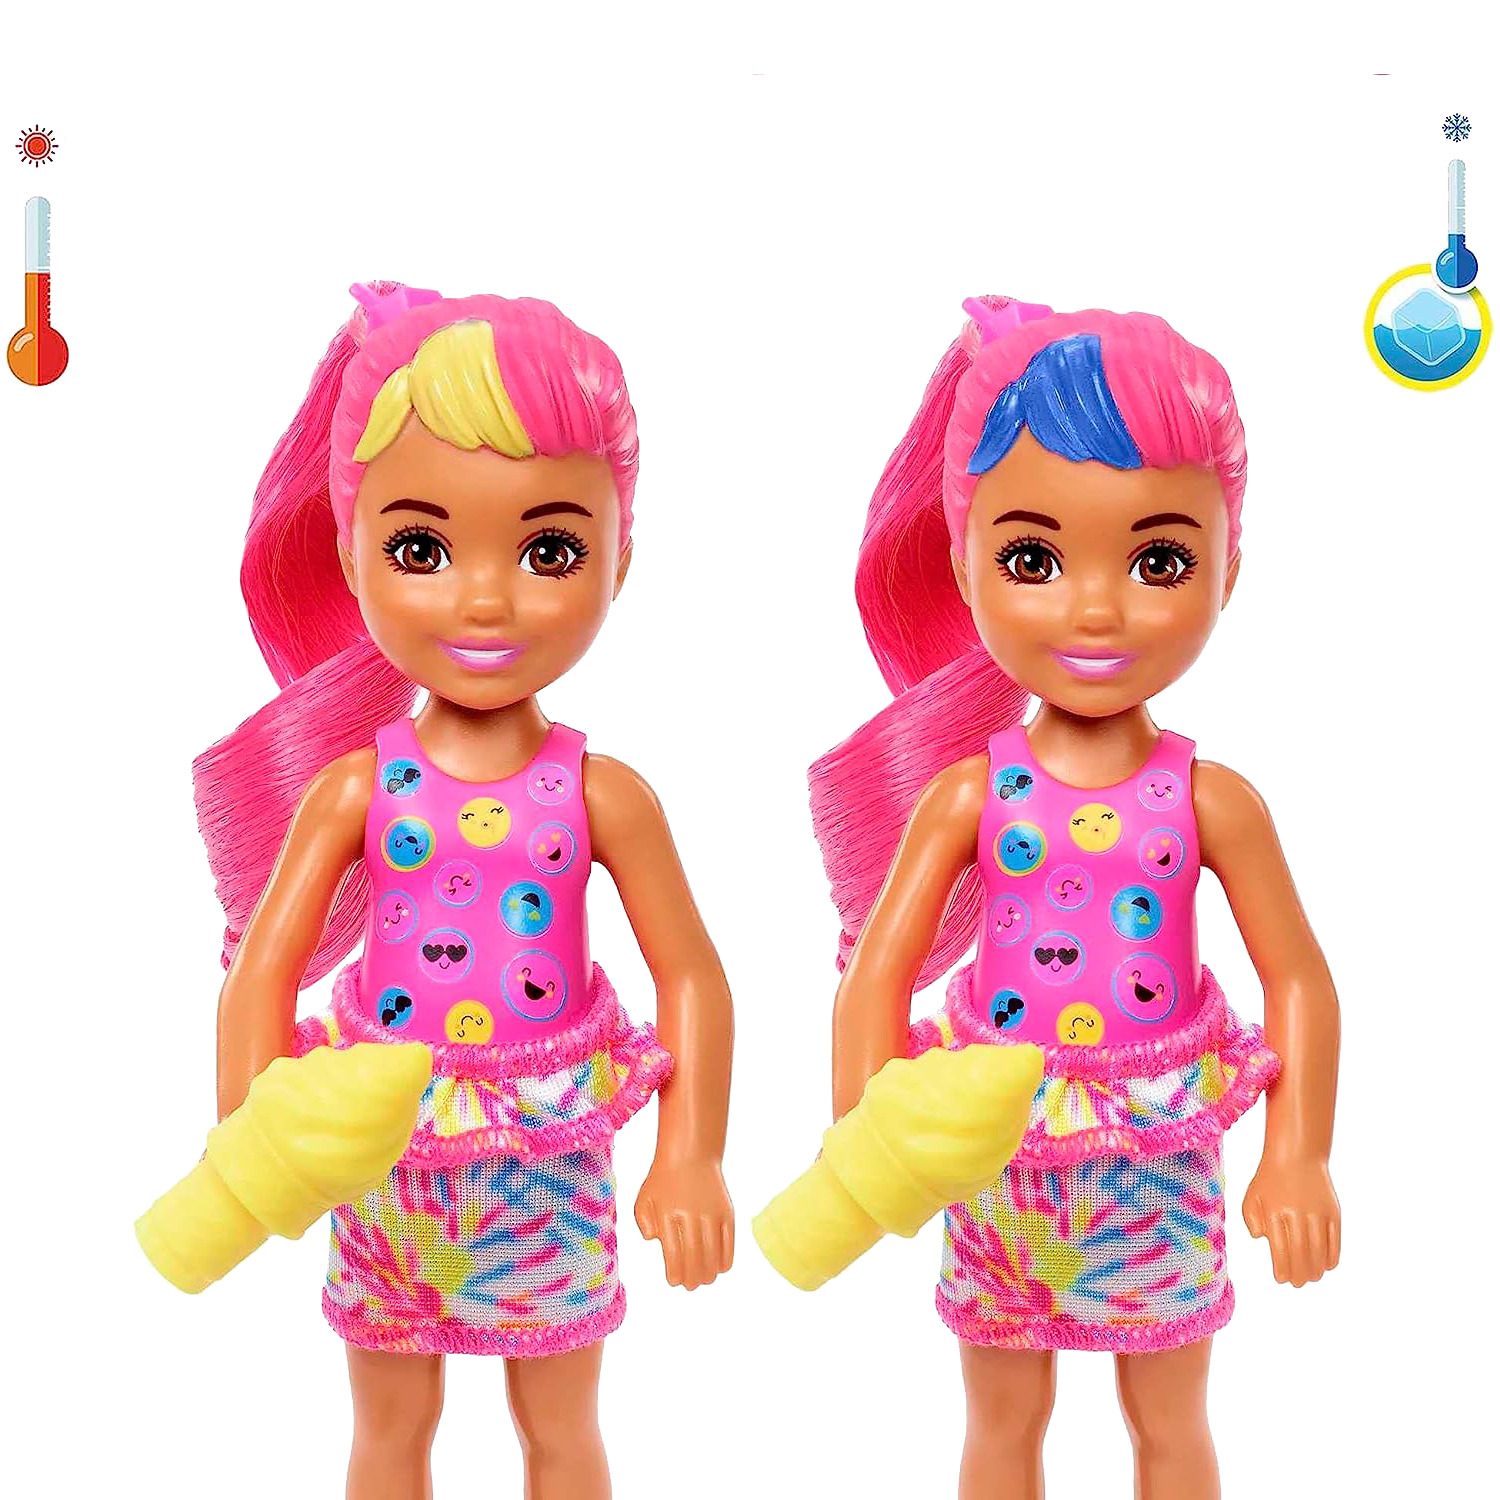 Barbie - Color Reveal - Neon tie-dye series, Chelsea doll with 6